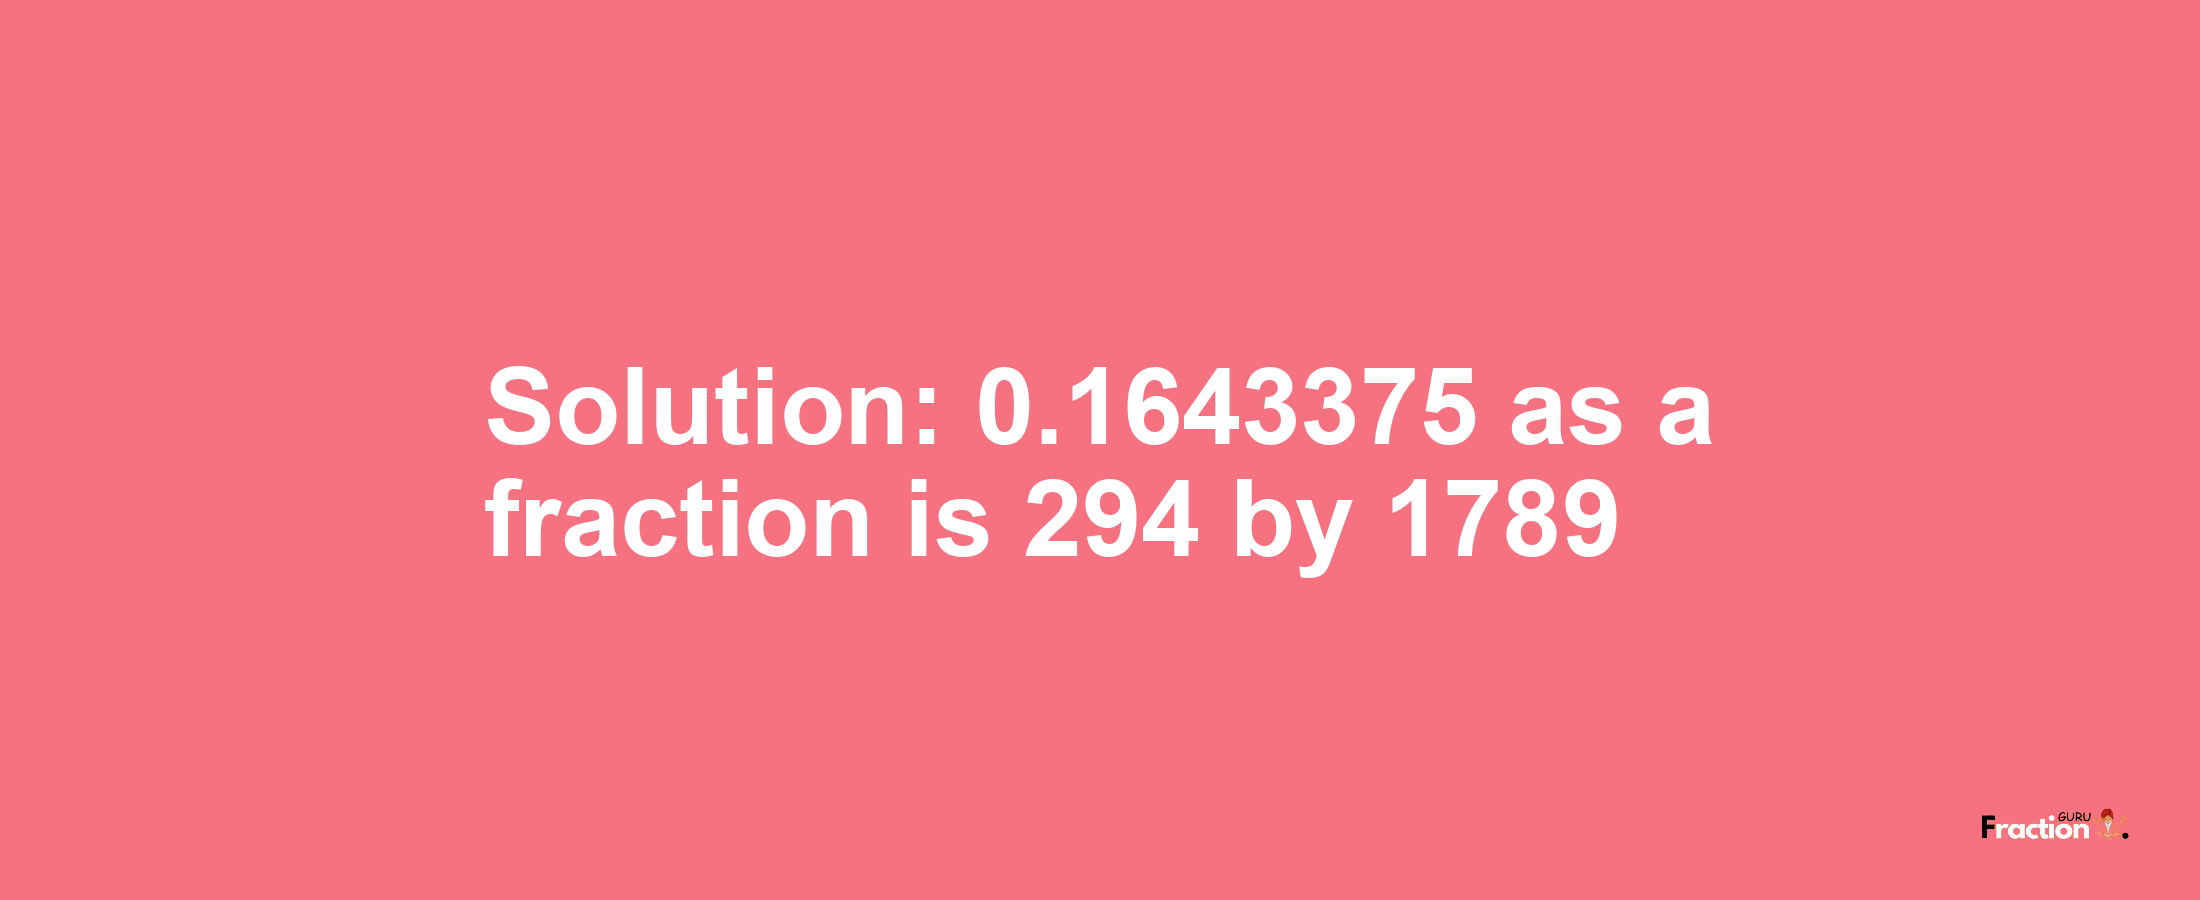 Solution:0.1643375 as a fraction is 294/1789